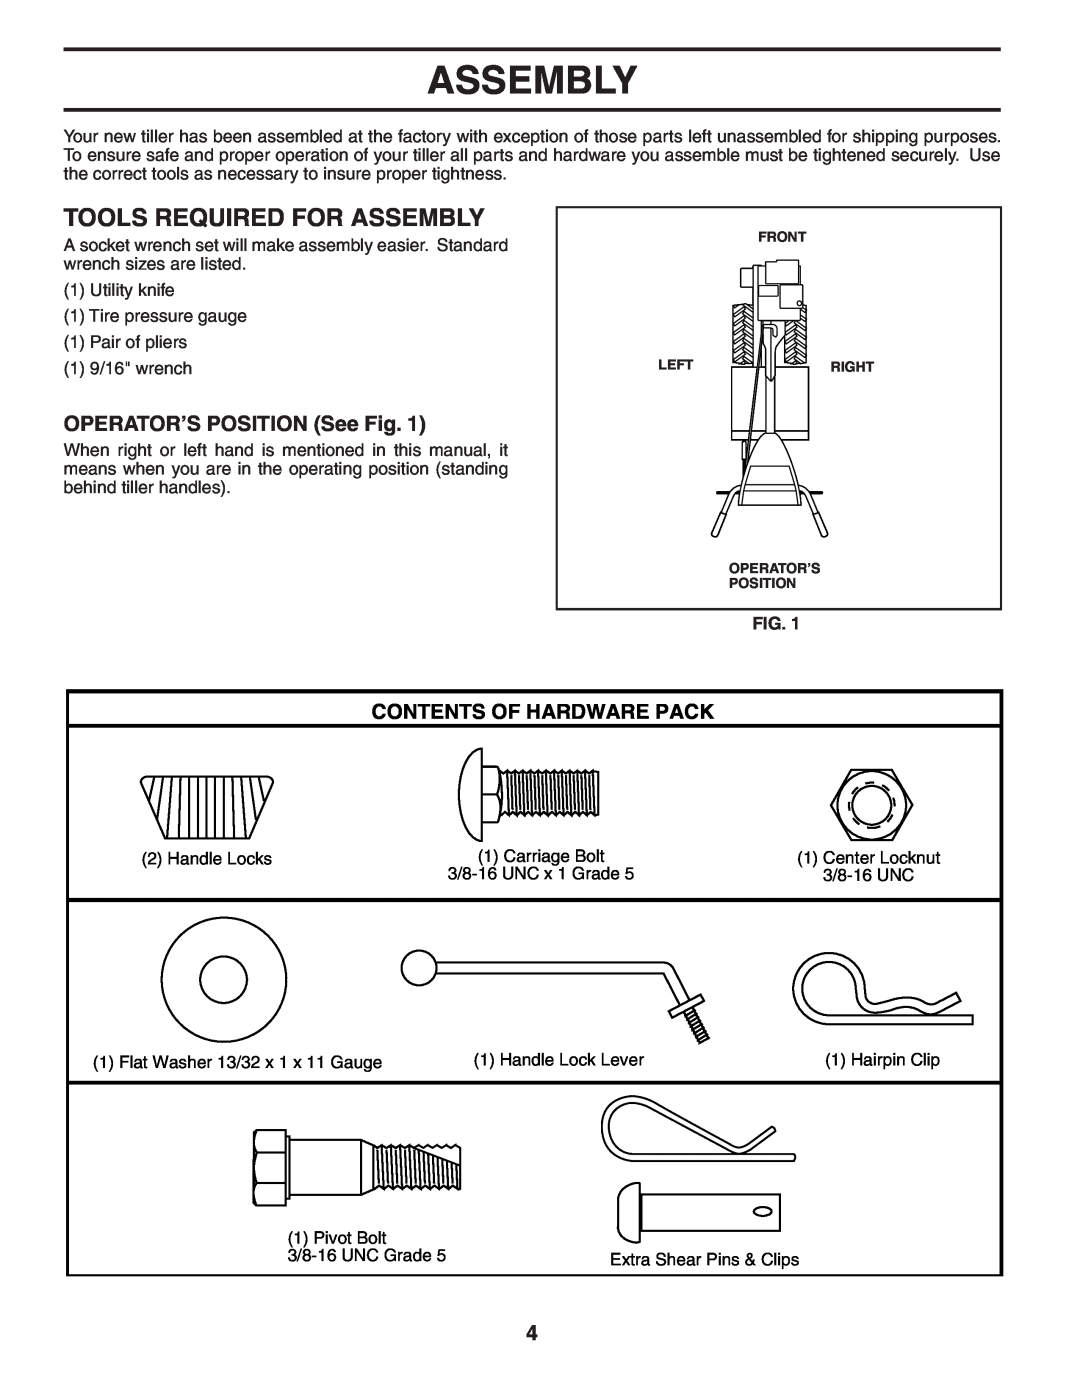 Poulan 401423, 96092000500 manual Tools Required For Assembly, OPERATOR’S POSITION See Fig, Contents Of Hardware Pack 